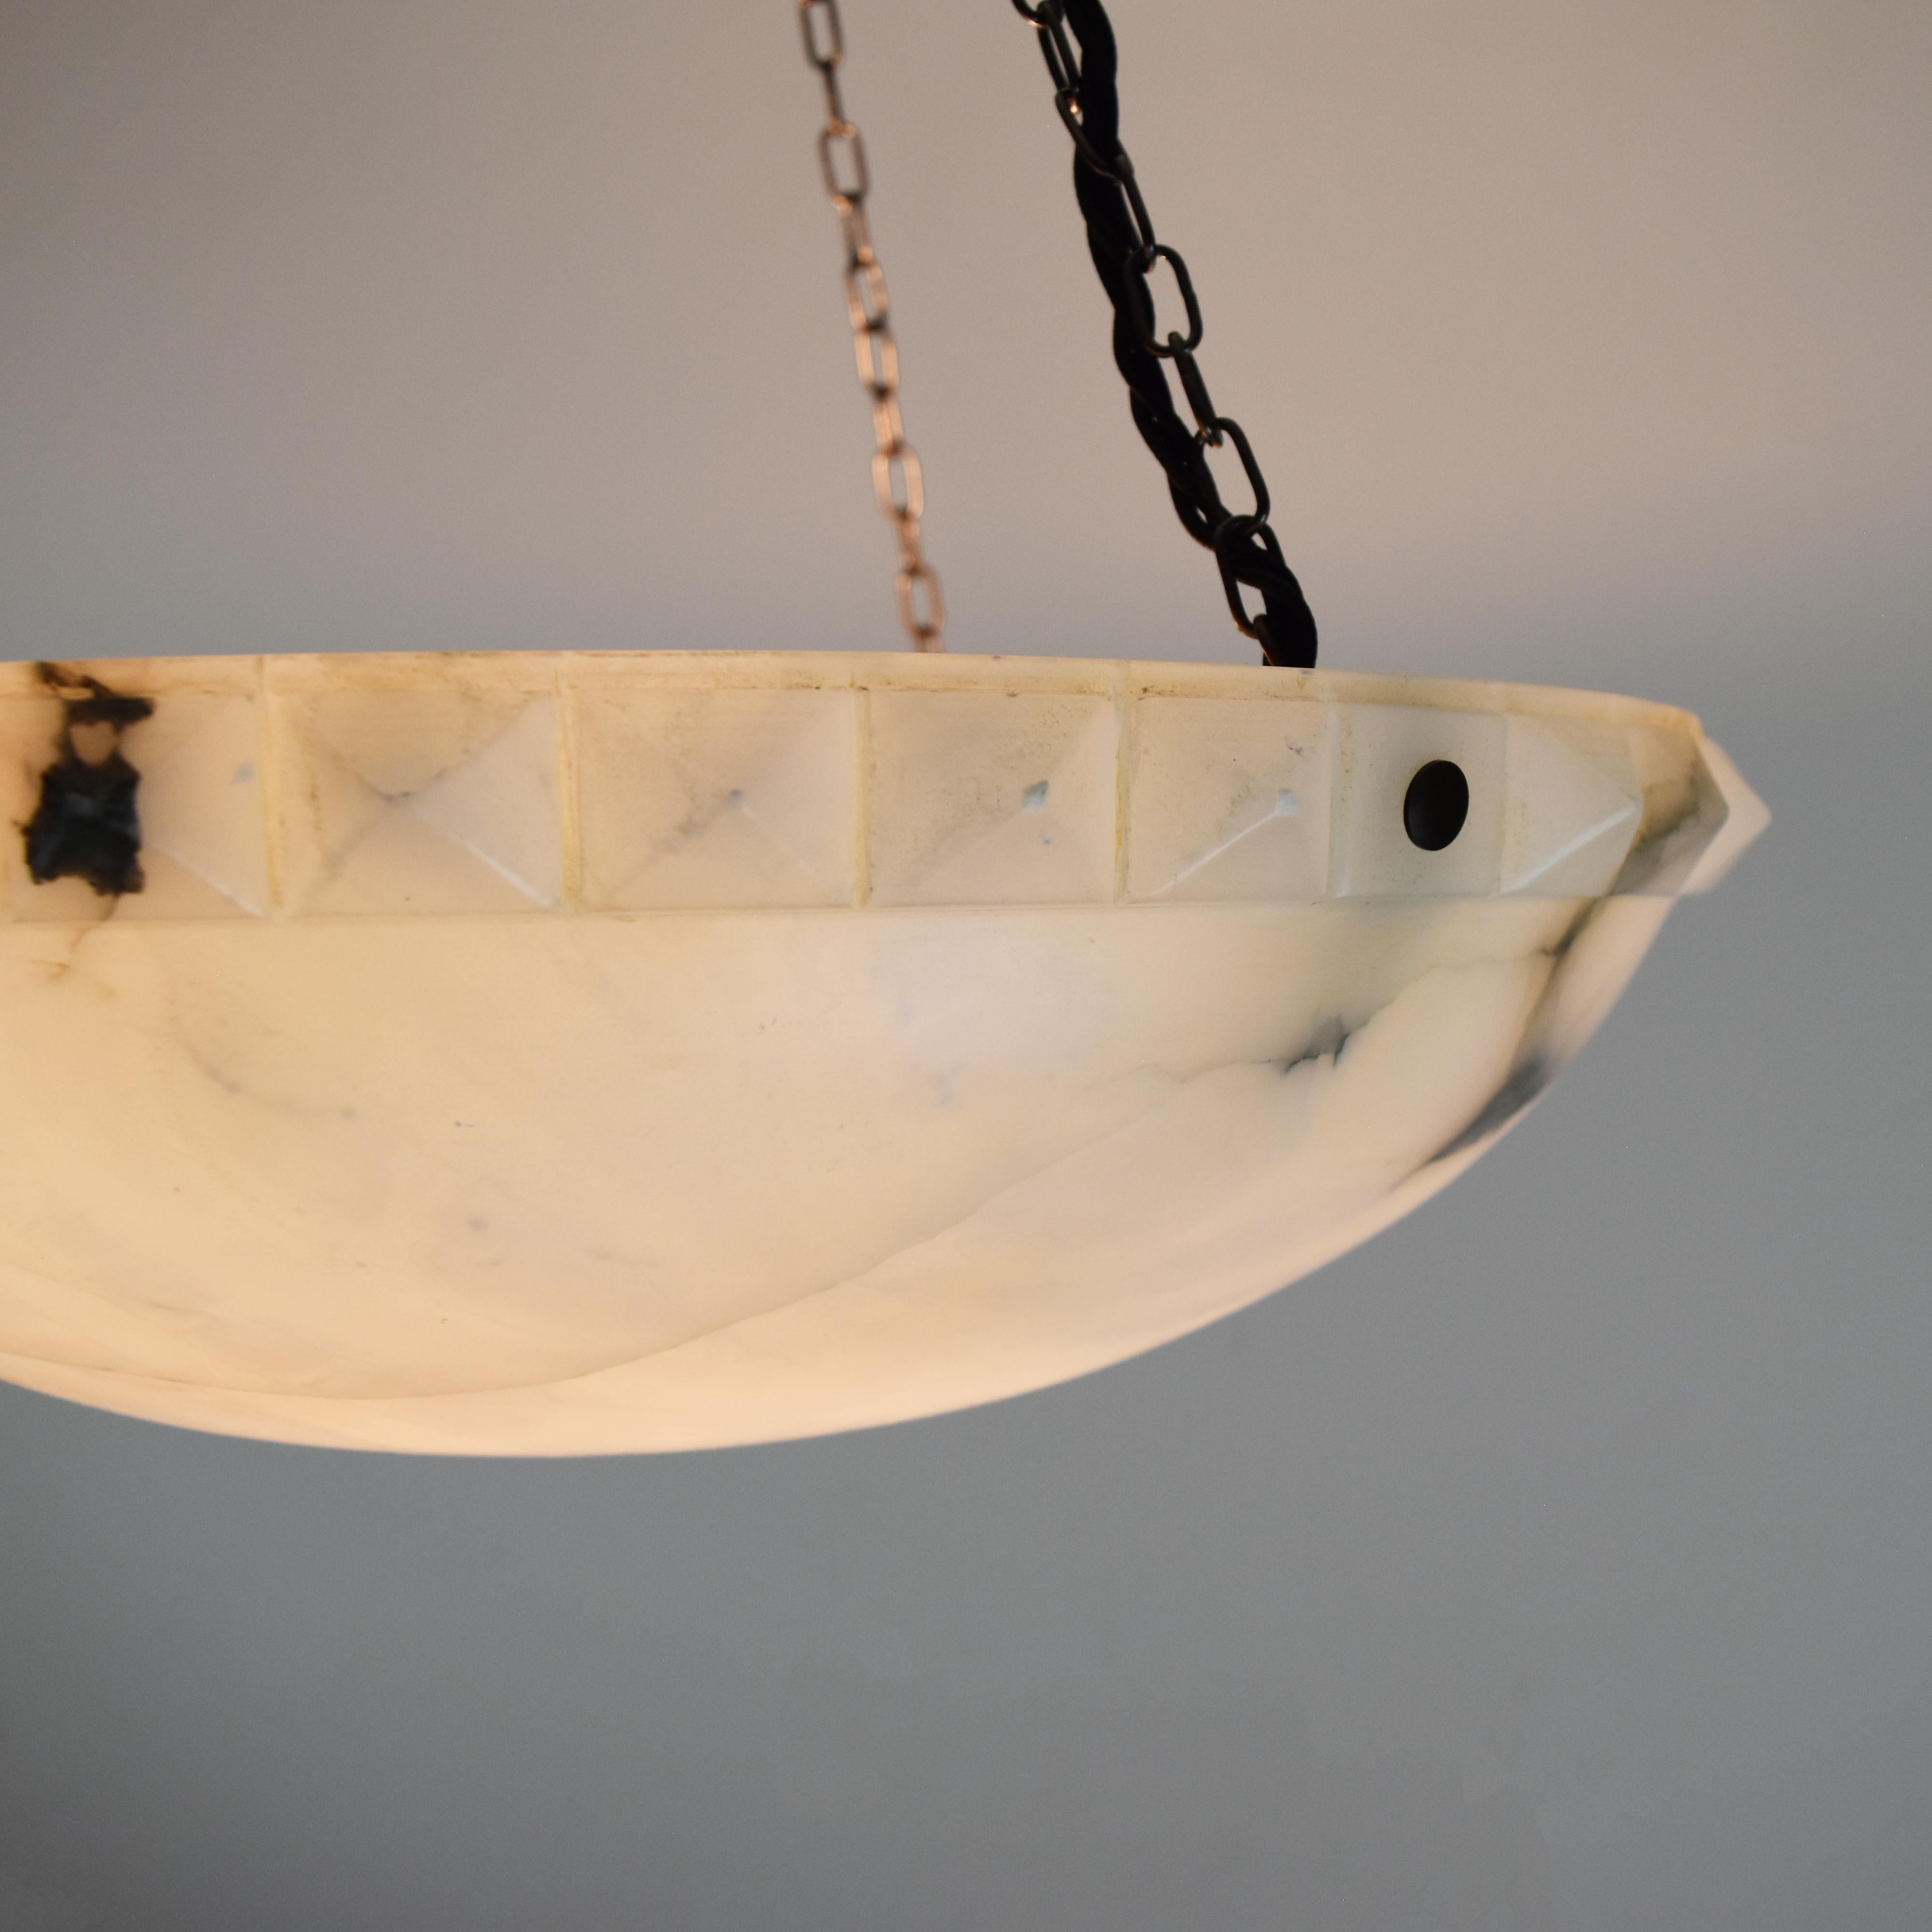 Early 20th Century Large Hobnailed Art Deco Bright Alabaster Pendant Light Ceiling Fixture Lamp